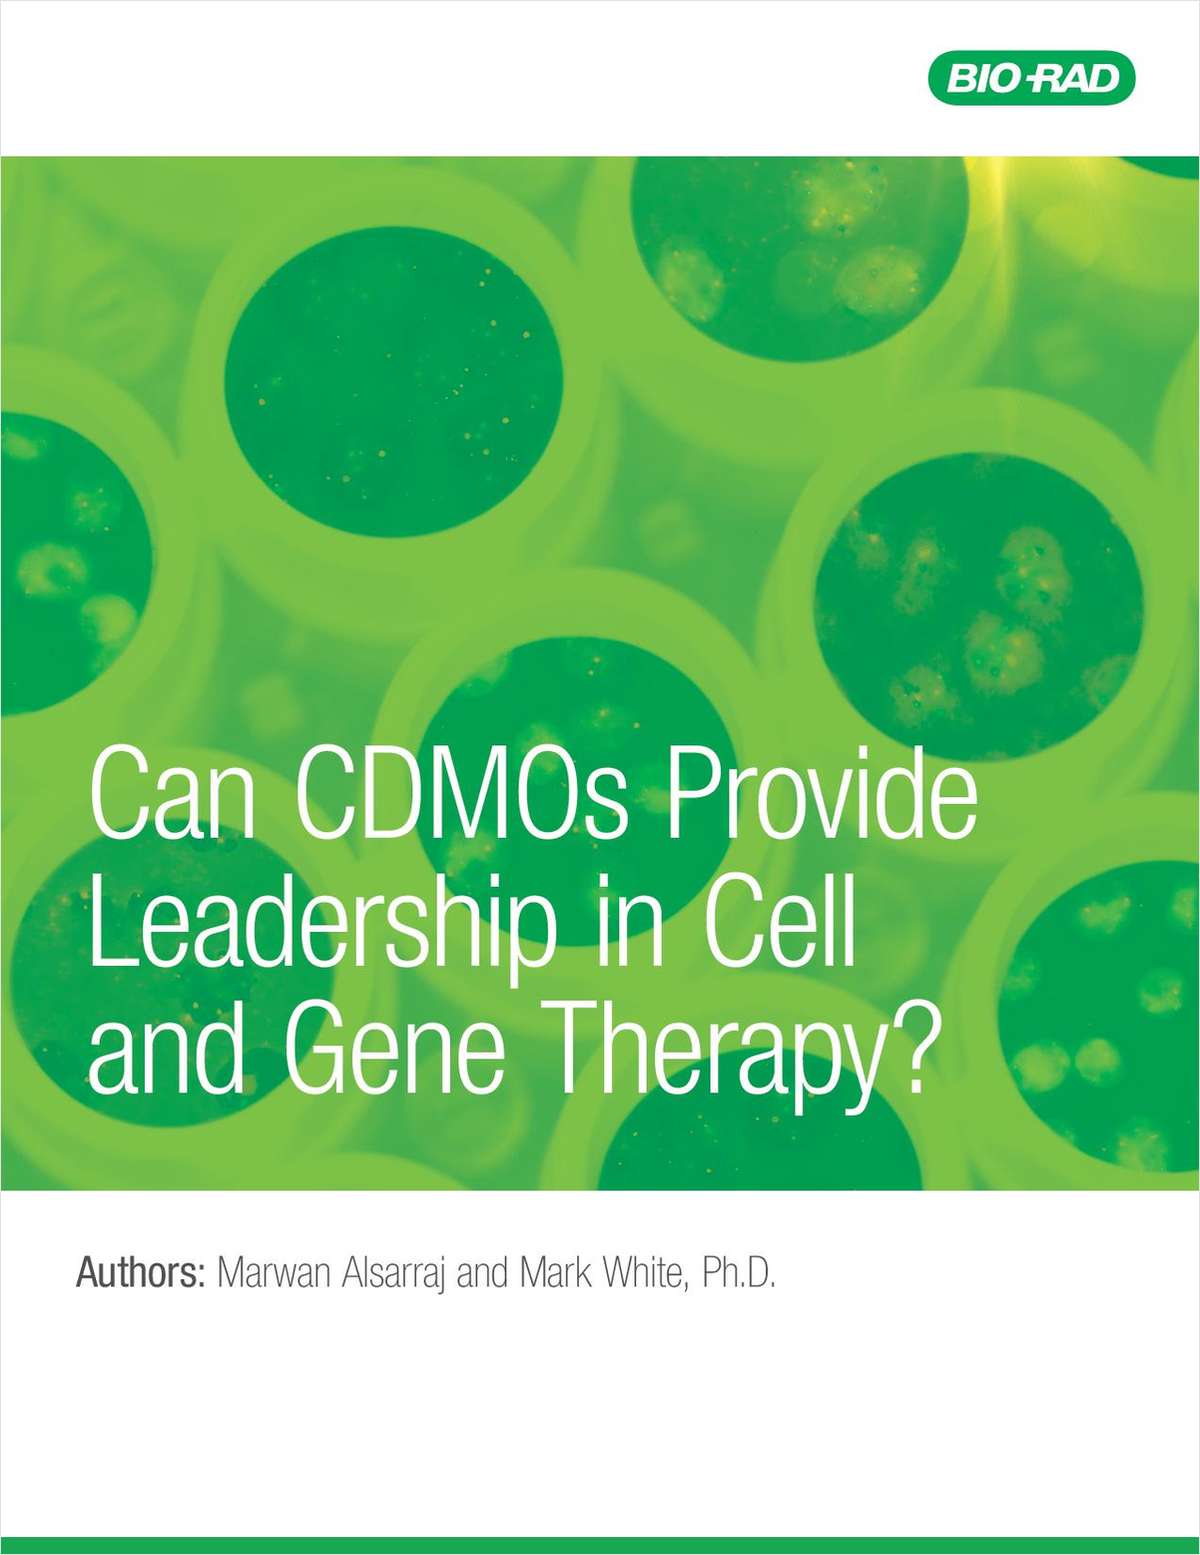 Can CDMOs Provide Leadership in Cell and Gene Therapy?